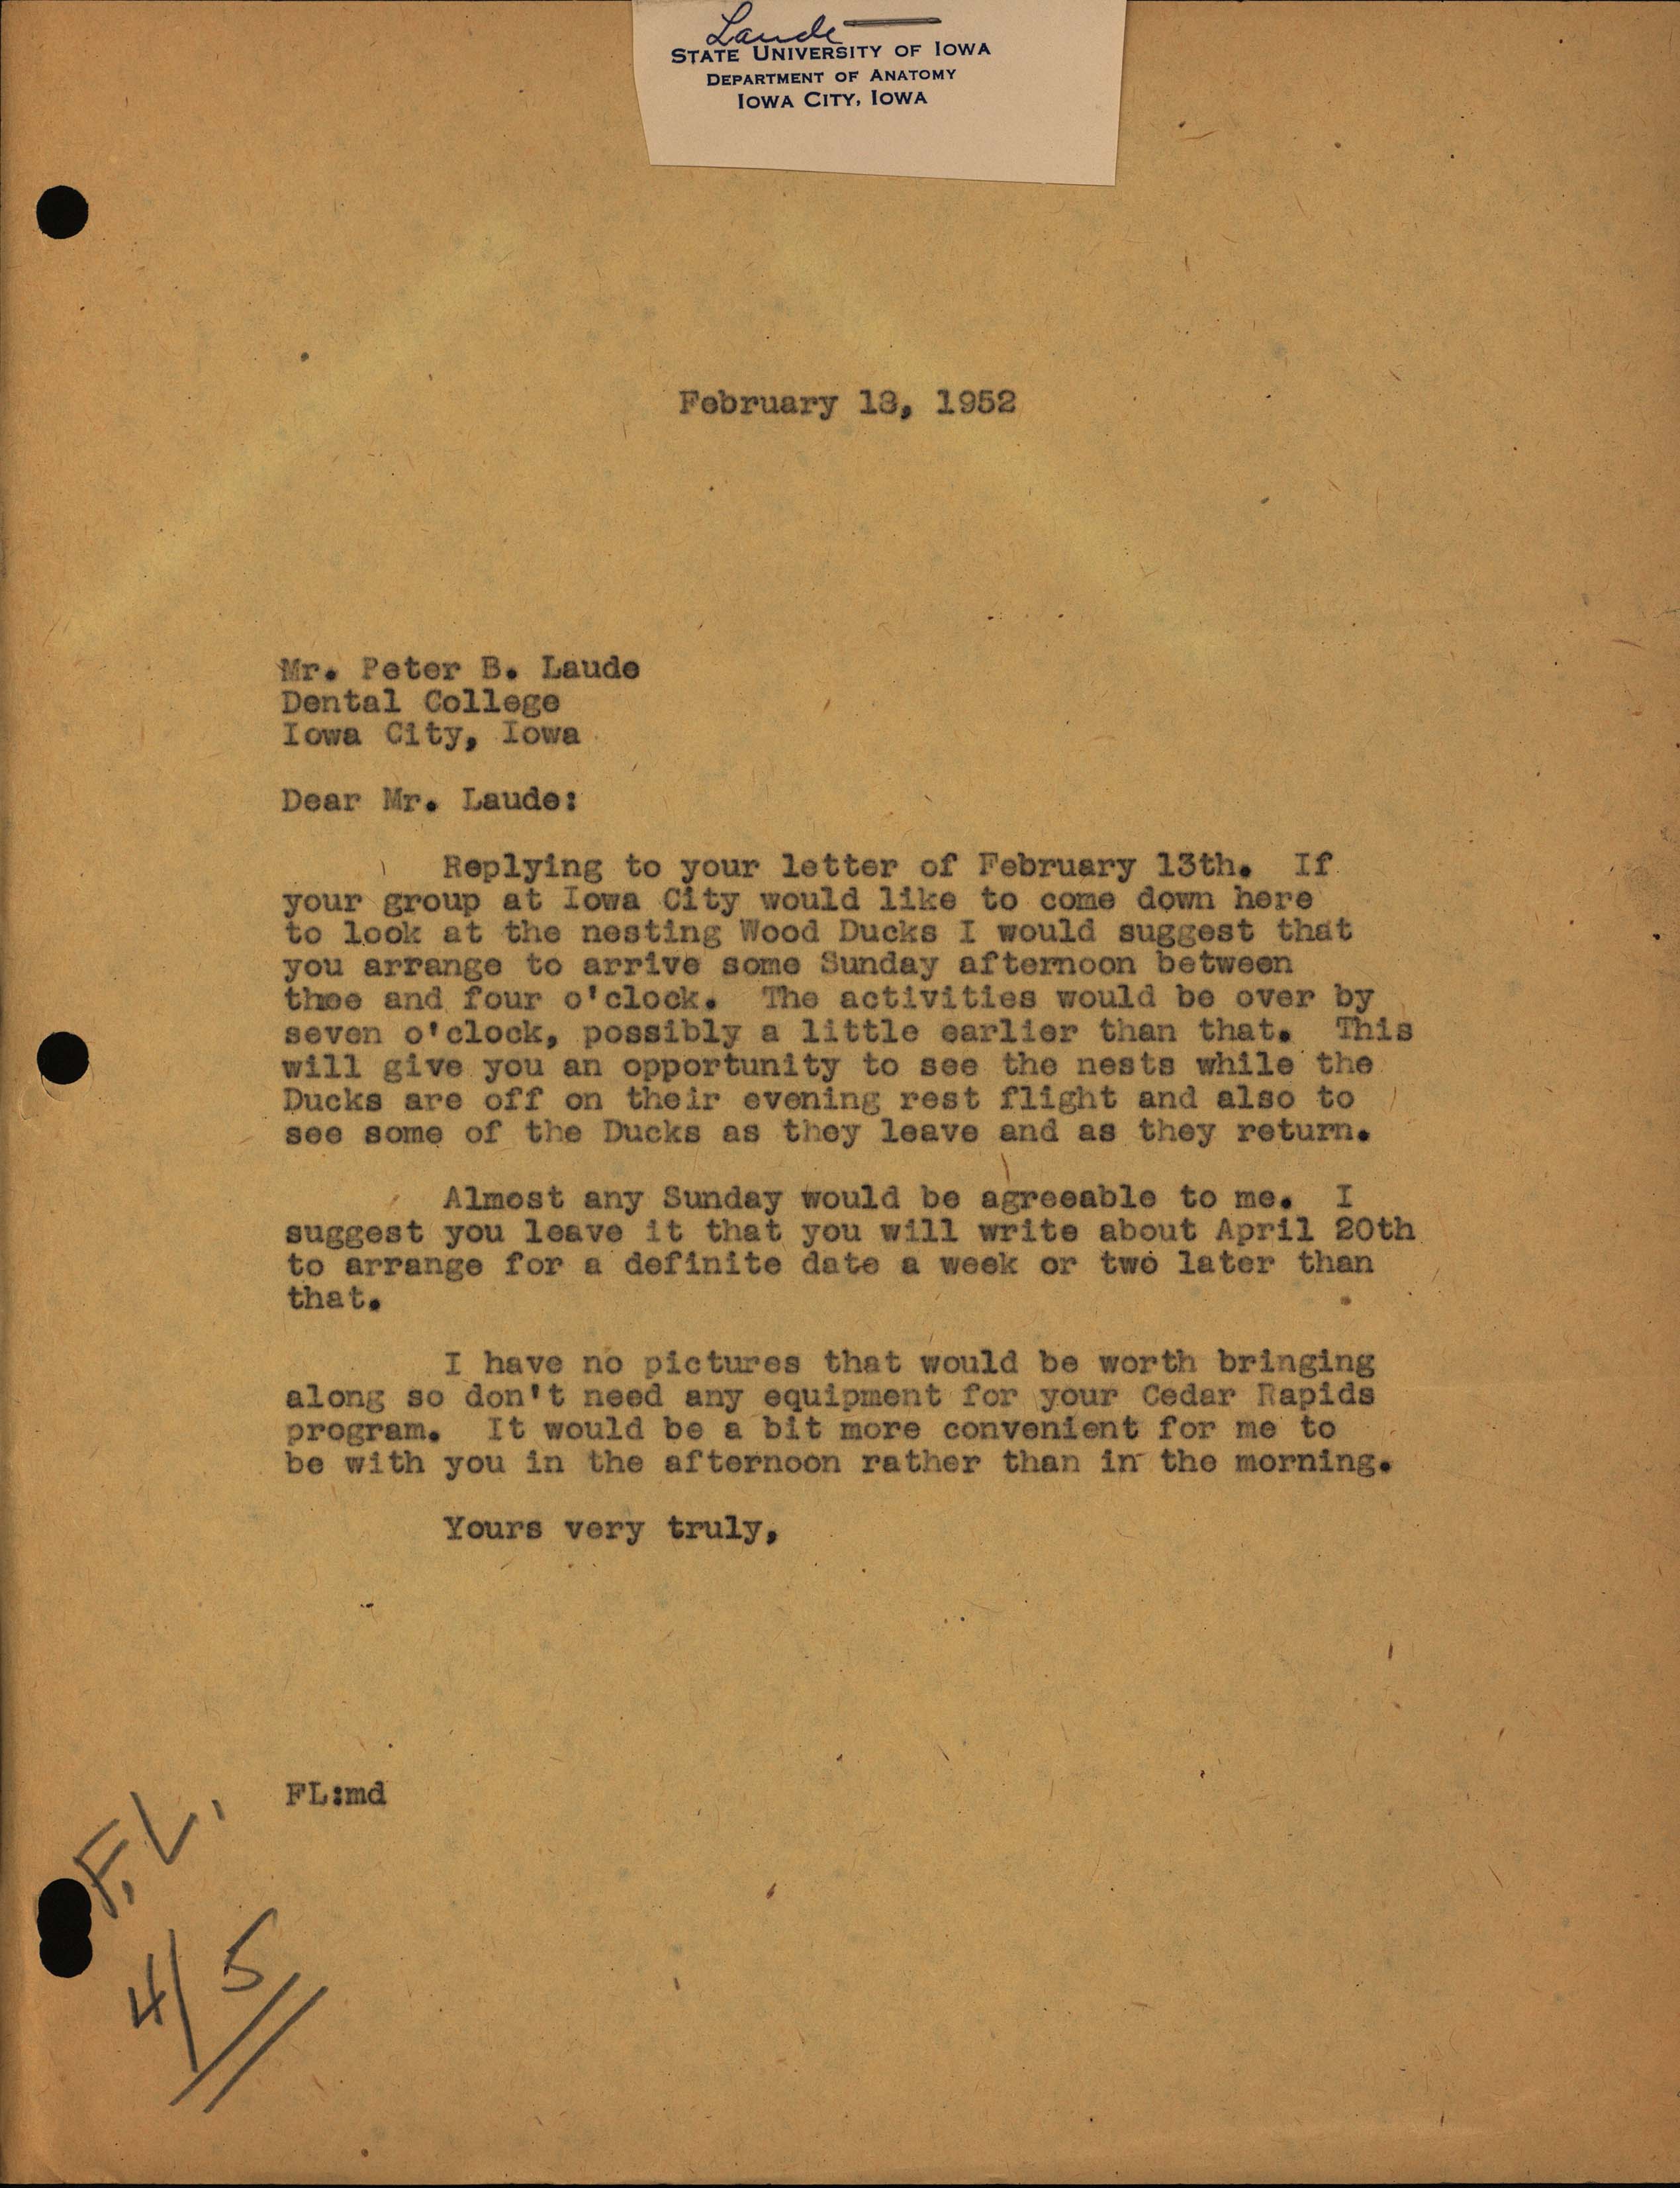 Frederic Leopold letter to Peter P. Laude regarding an invitation to view the Wood Ducks and the Iowa Ornithologists' Union annual meeting, February 18, 1952